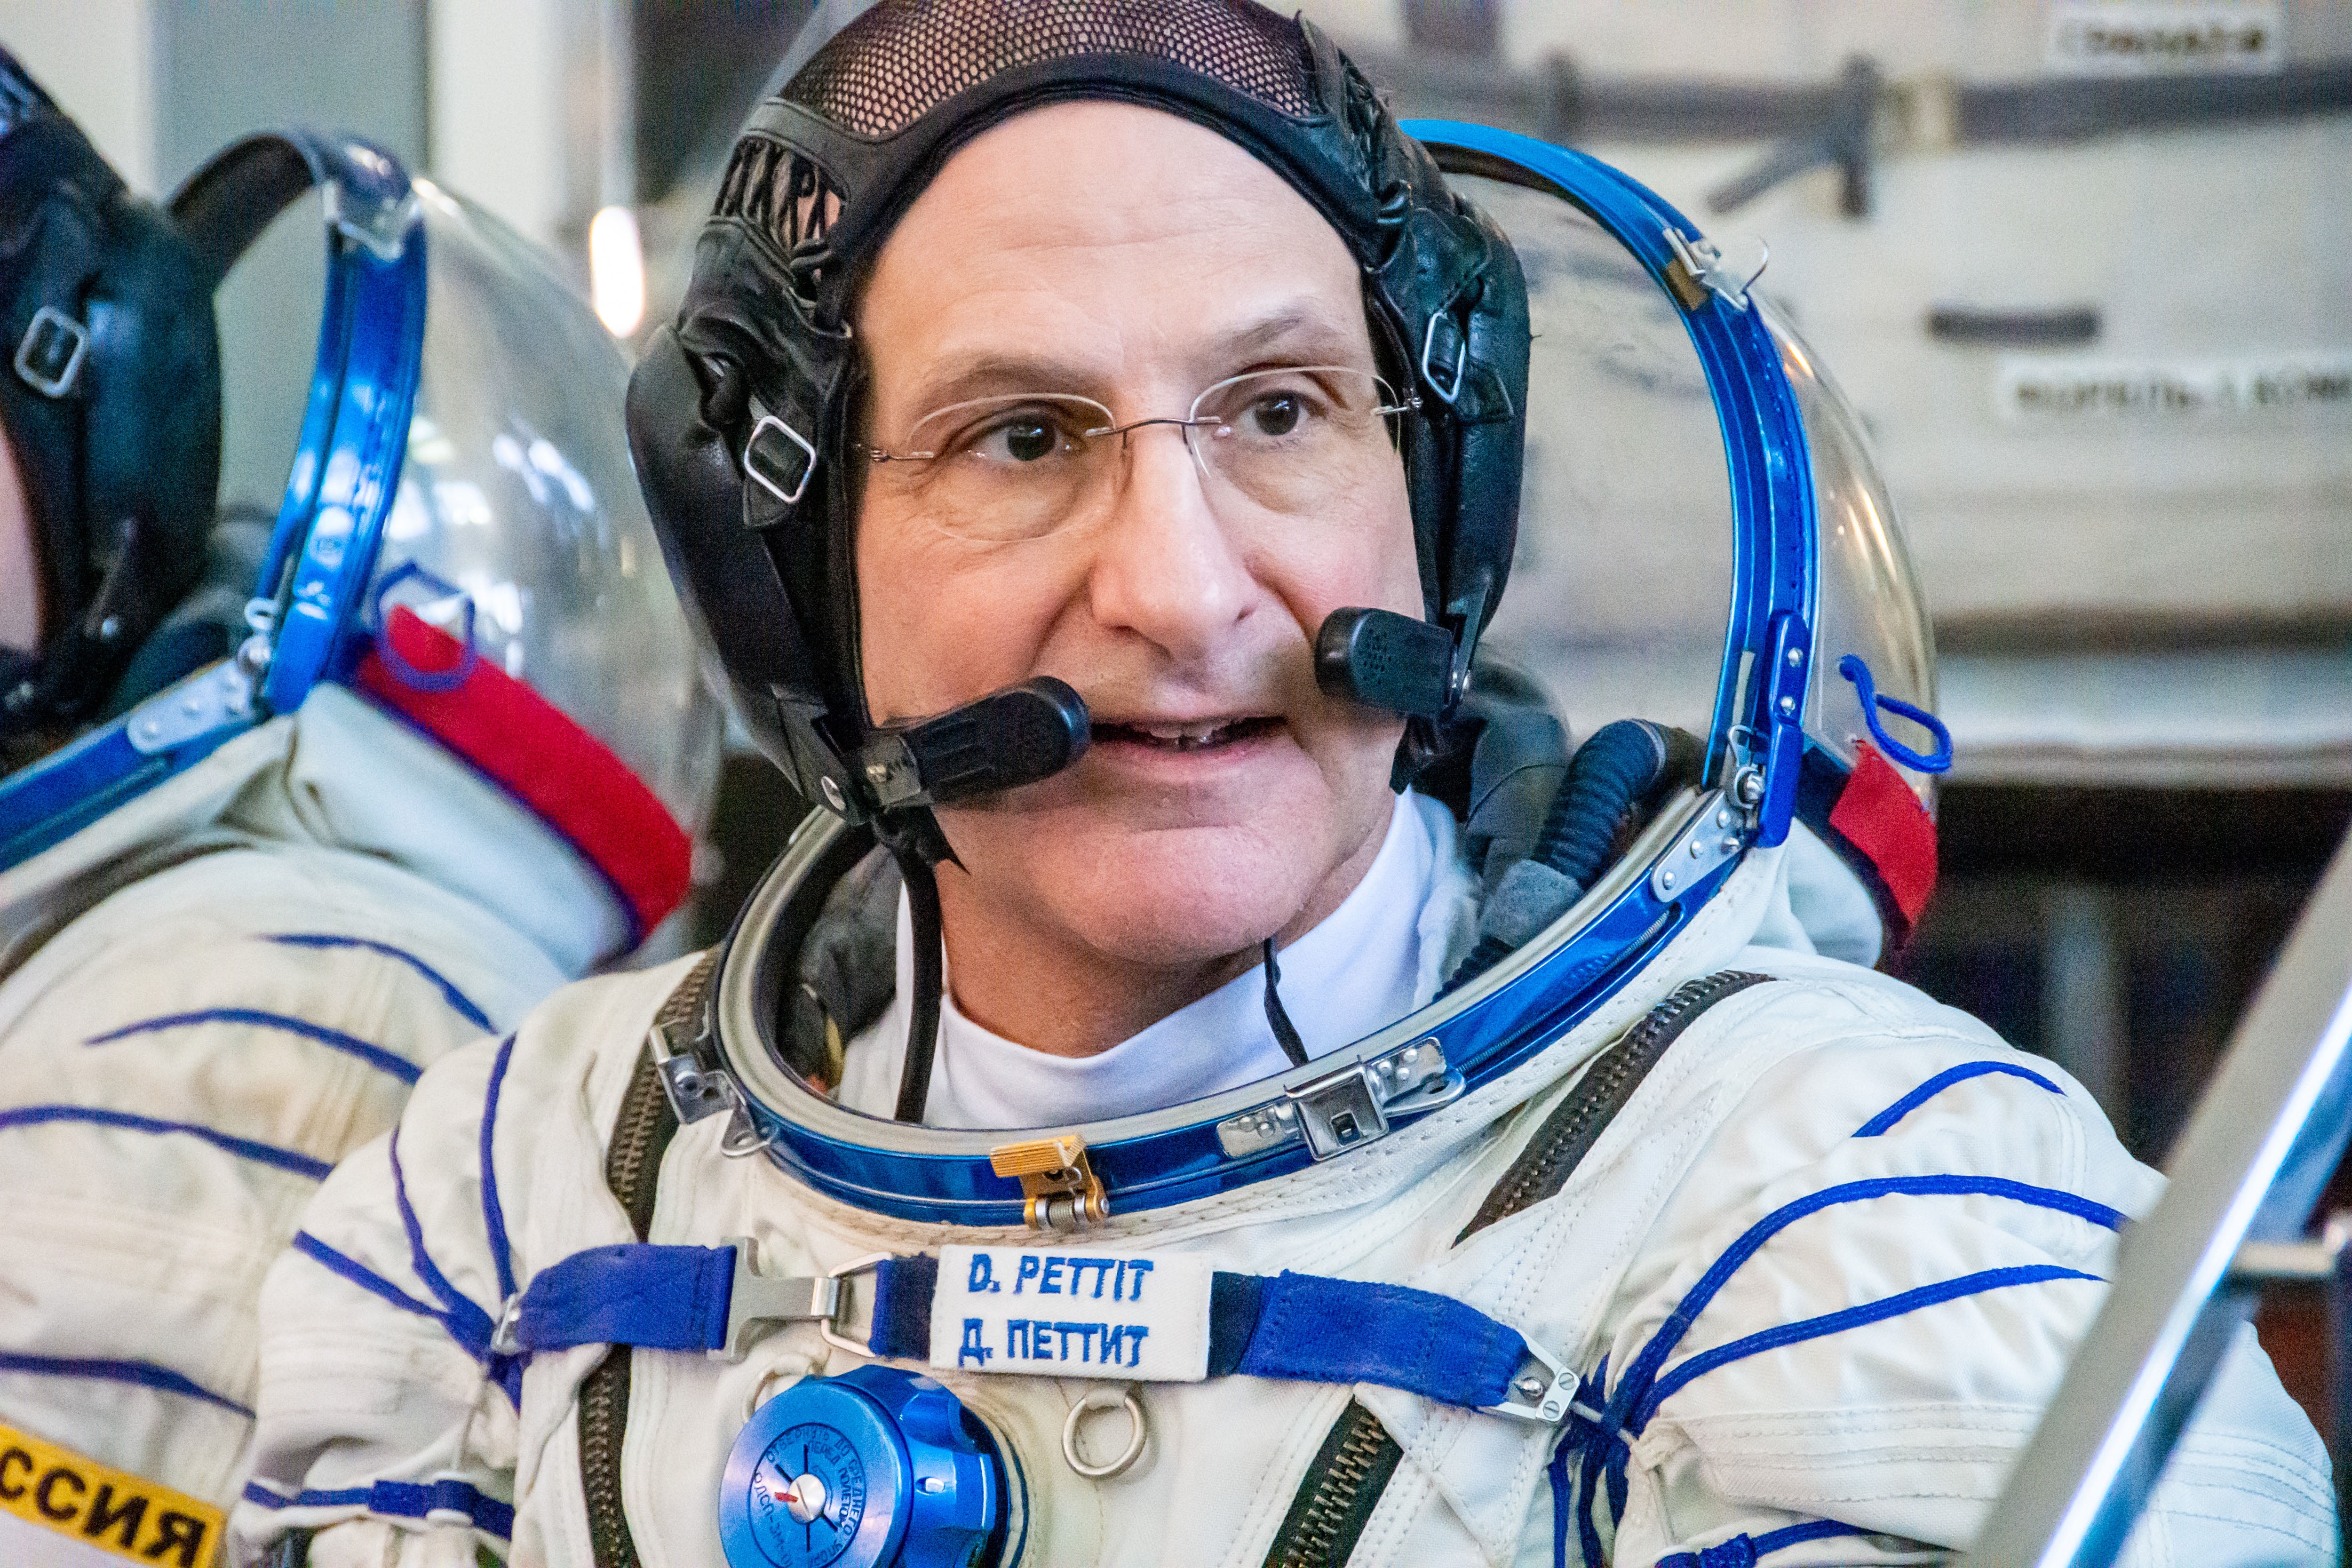 Candid photograph of Don Pettit from NASA, pictured in his Sokol launch and entry suit